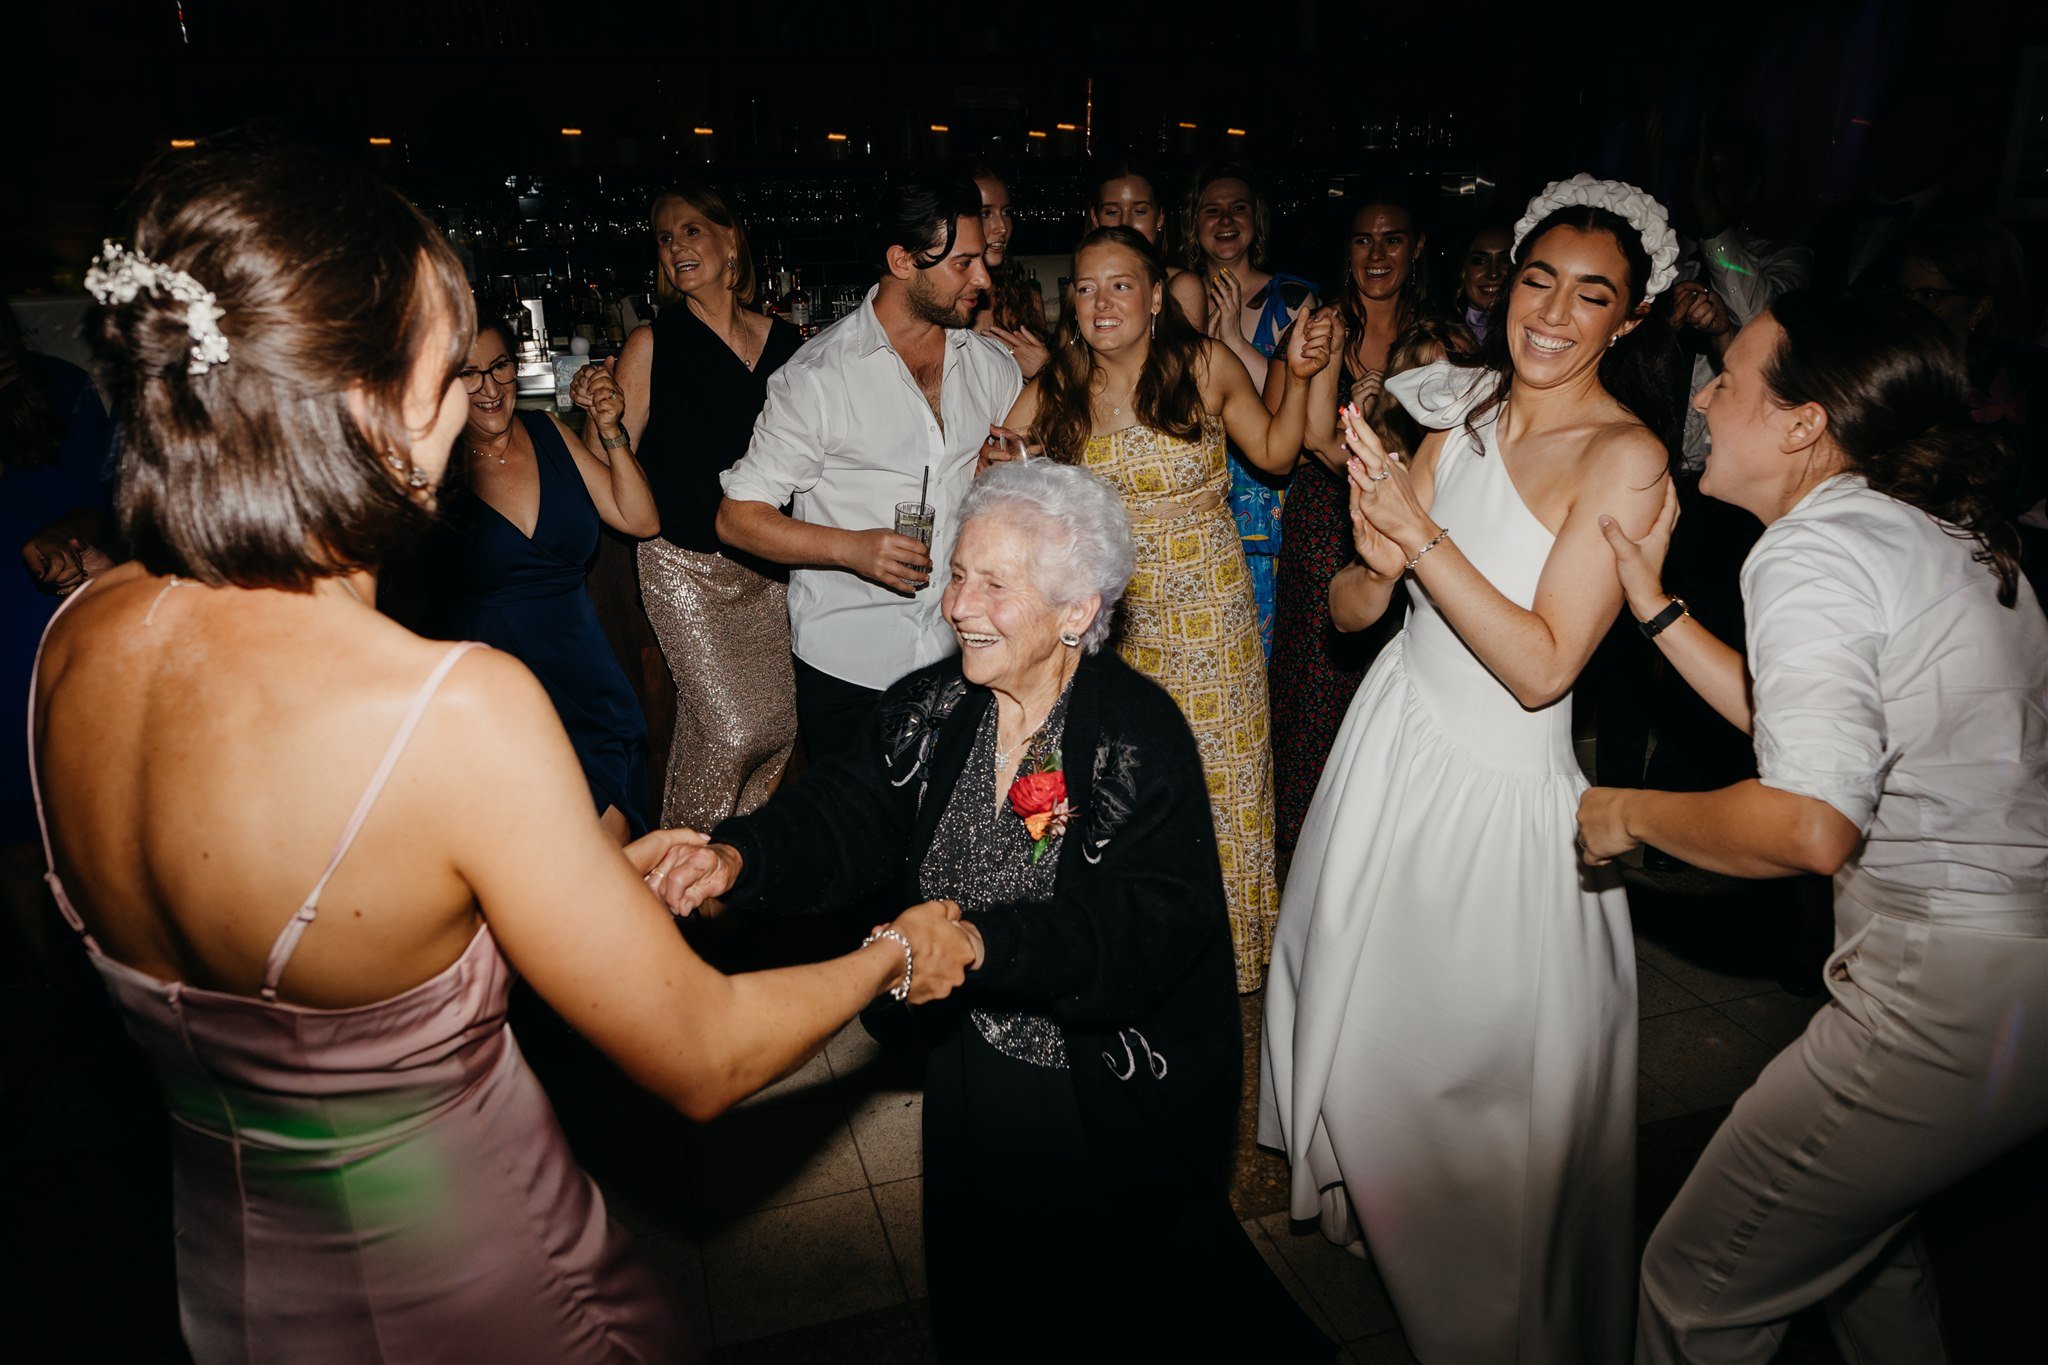 There's nothing sweeter than getting down on the dance floor with everyone you love ❤

Photography @amandaalessiphotography
Celebrant @thehitchsitch
DJ @renee_the_celebrant
Florist @crownyourself.floraldesign
Makeup @makeupbylarissagattuso
Nails @mat